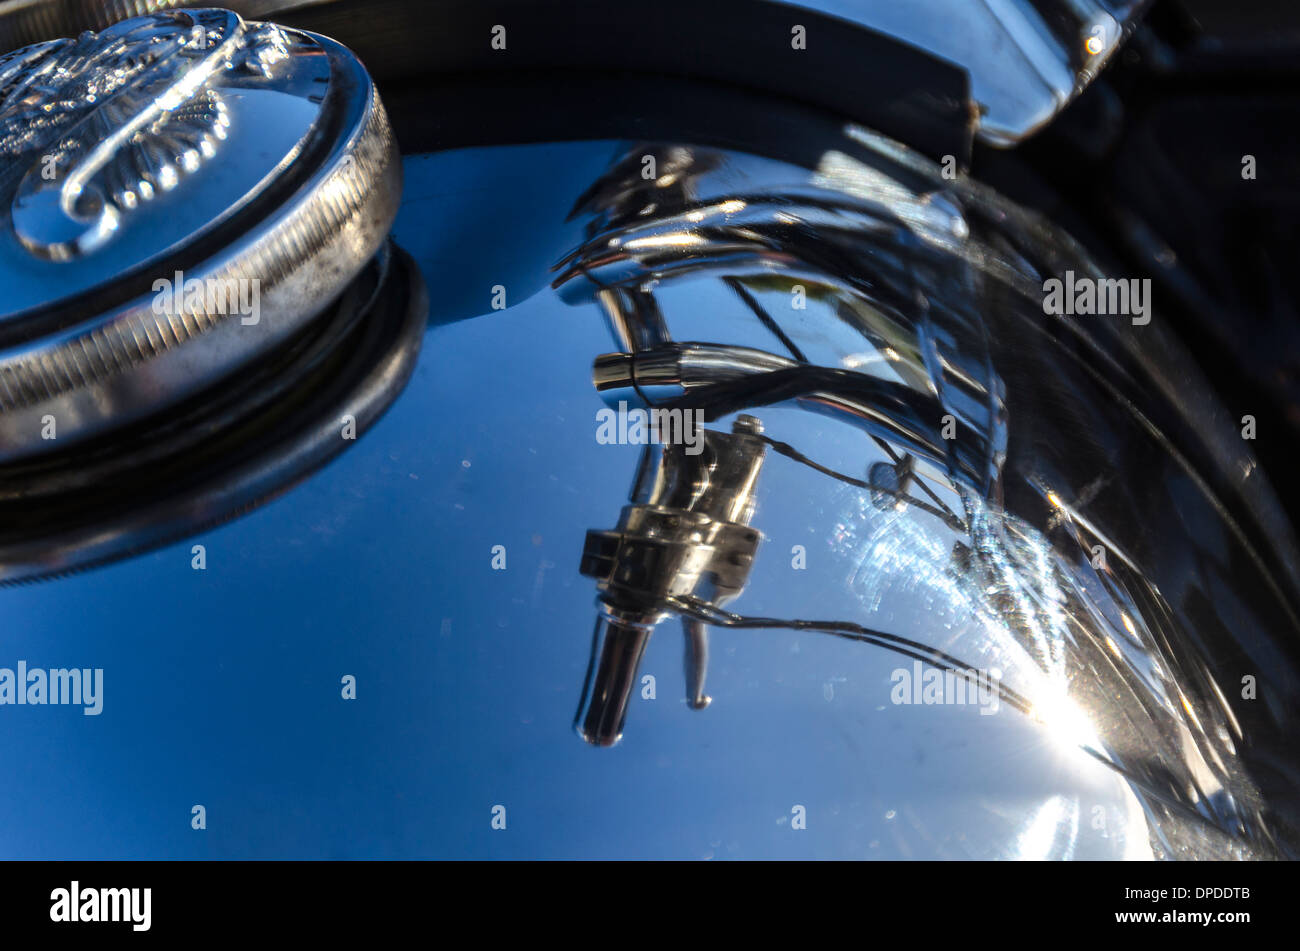 detail of the tank of a chopper Stock Photo